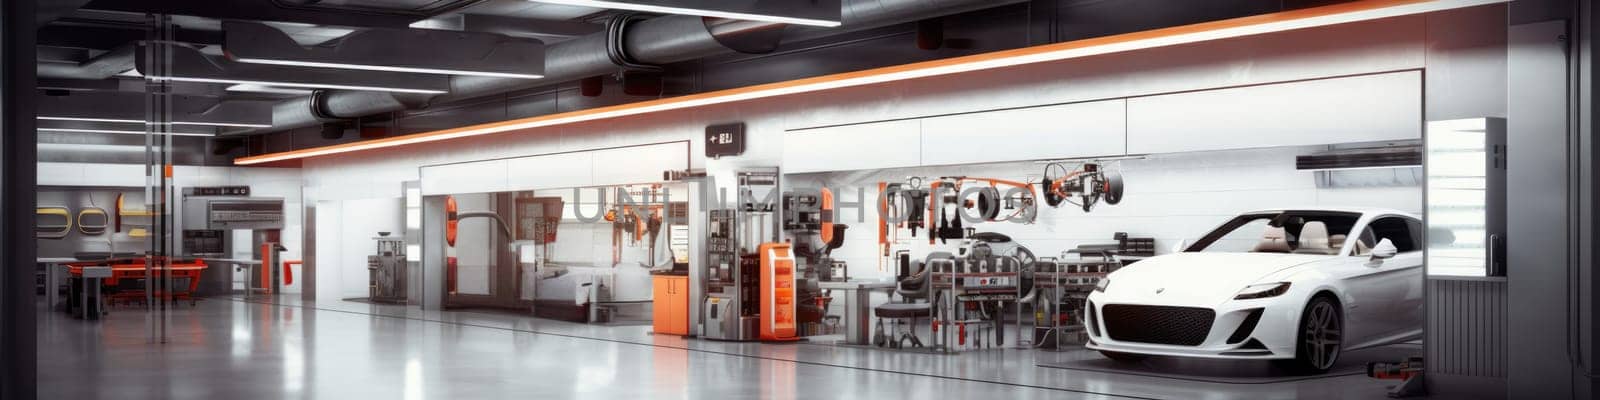 The auto repair shop of the future by cherezoff